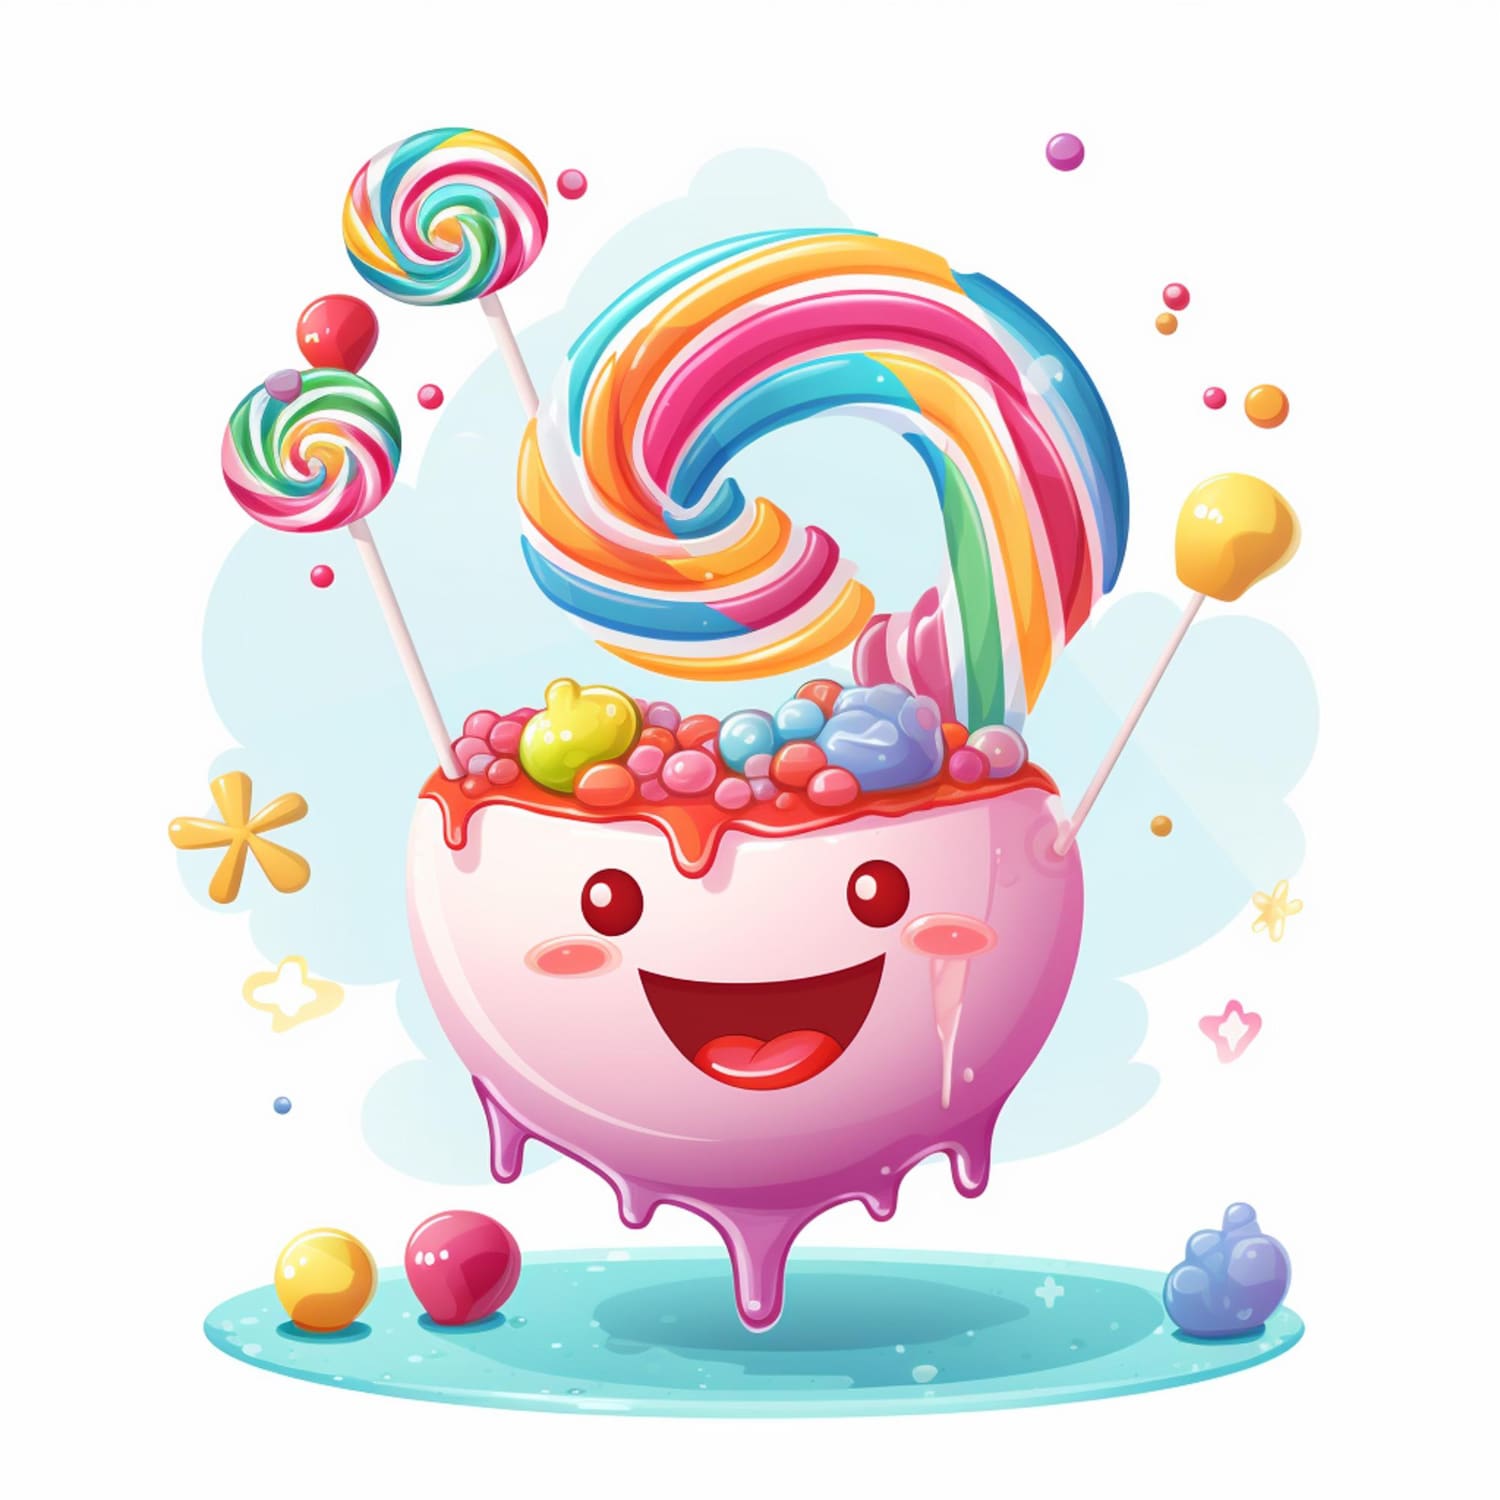 Cartoon graphic of a satisfied candy with a chef’s hat and sunglasses waving goodbye on a colorful candy background.